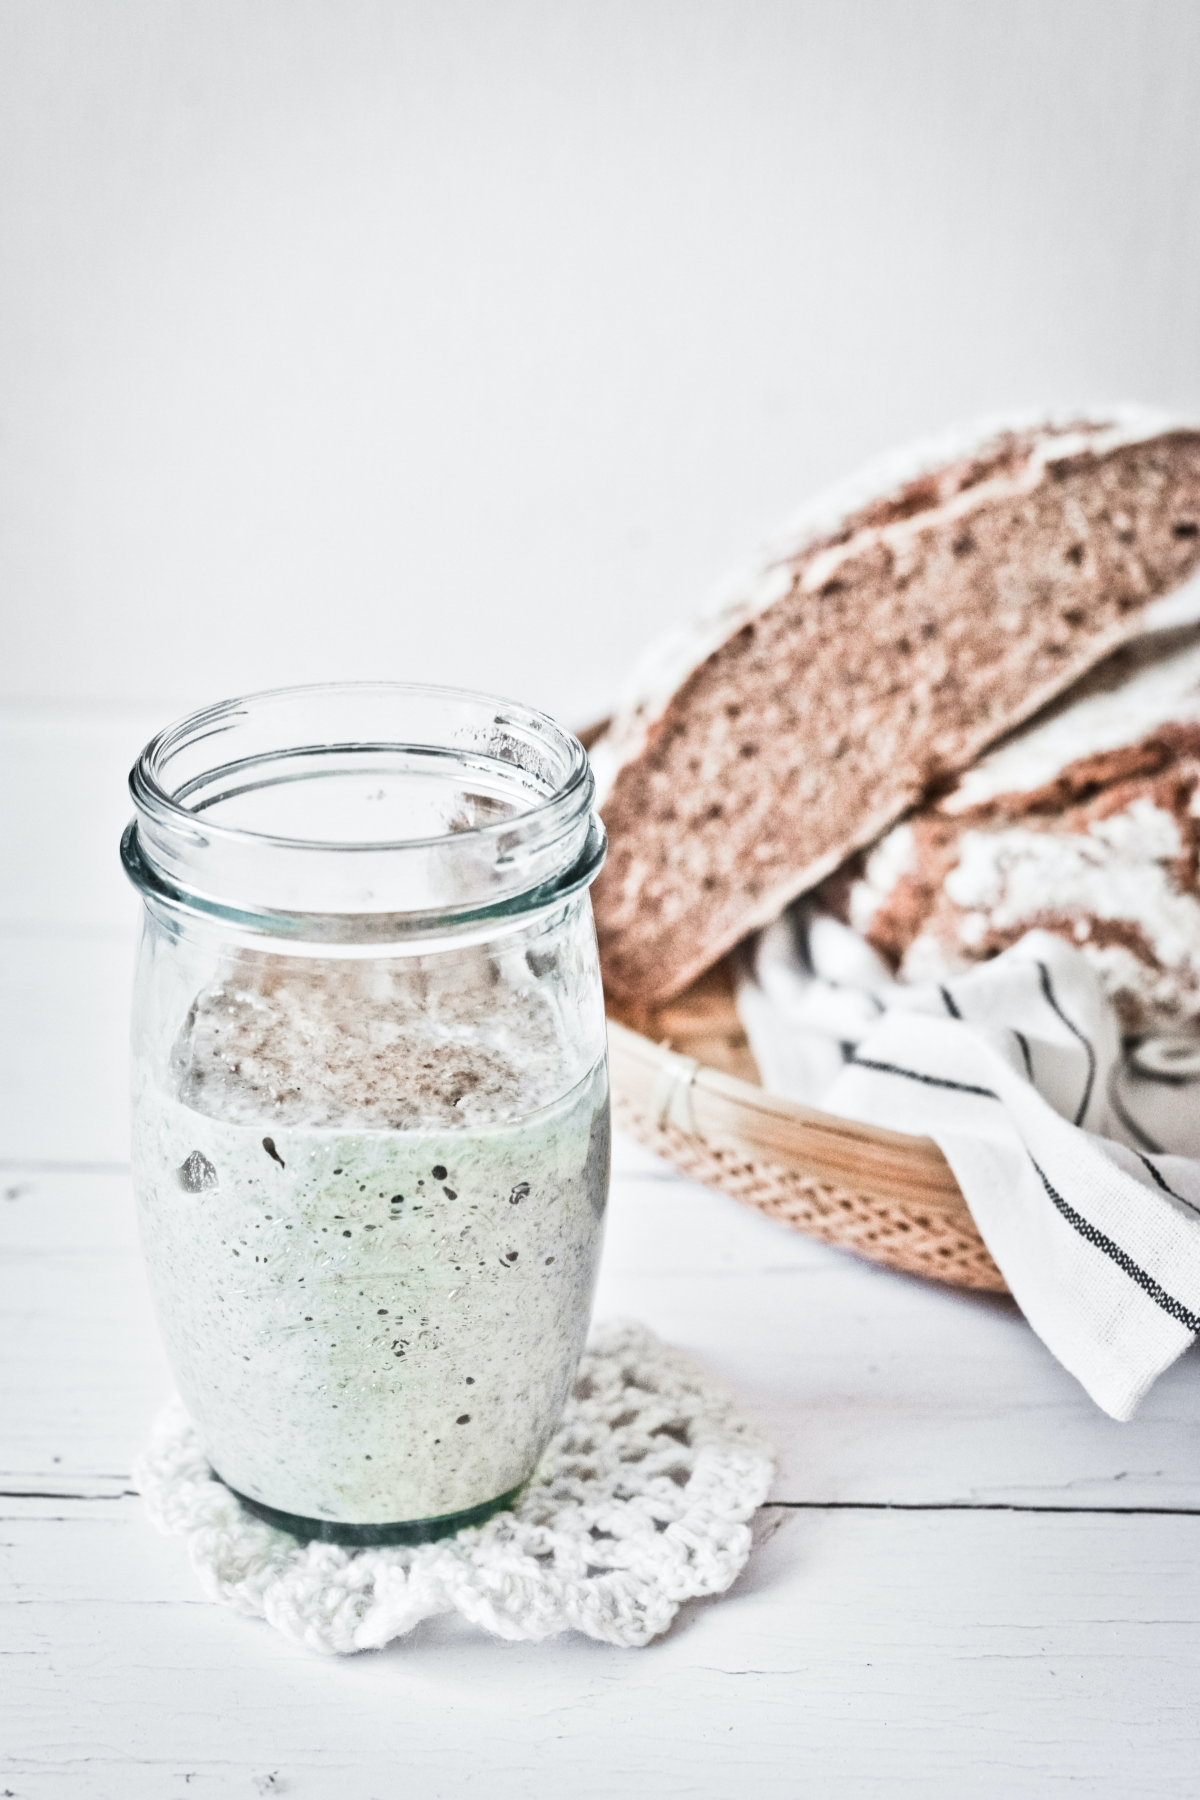 how to make sourdough starter quickly